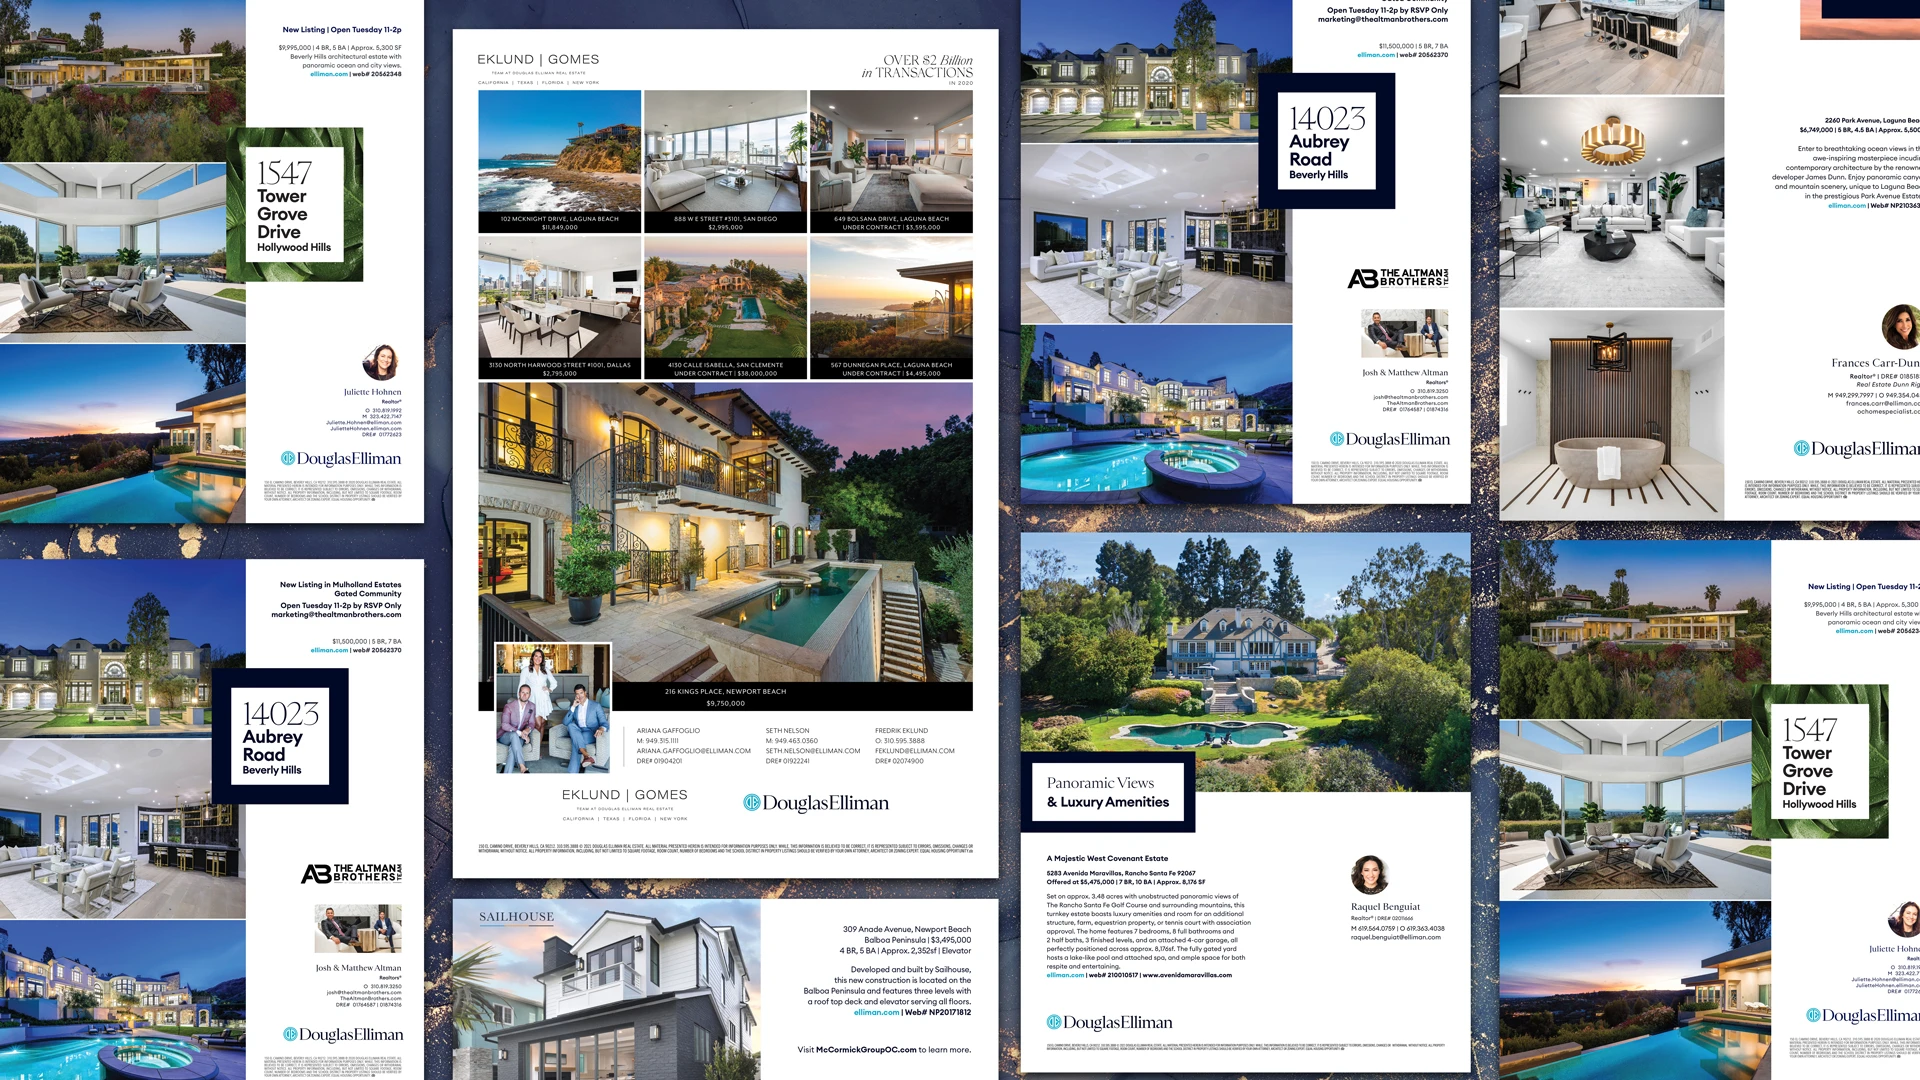 A matrix of print advertisements under Douglas Elliman branding for property advertisements, demonstrating a range of layouts all following the same visual language aligned with the corporate brand.